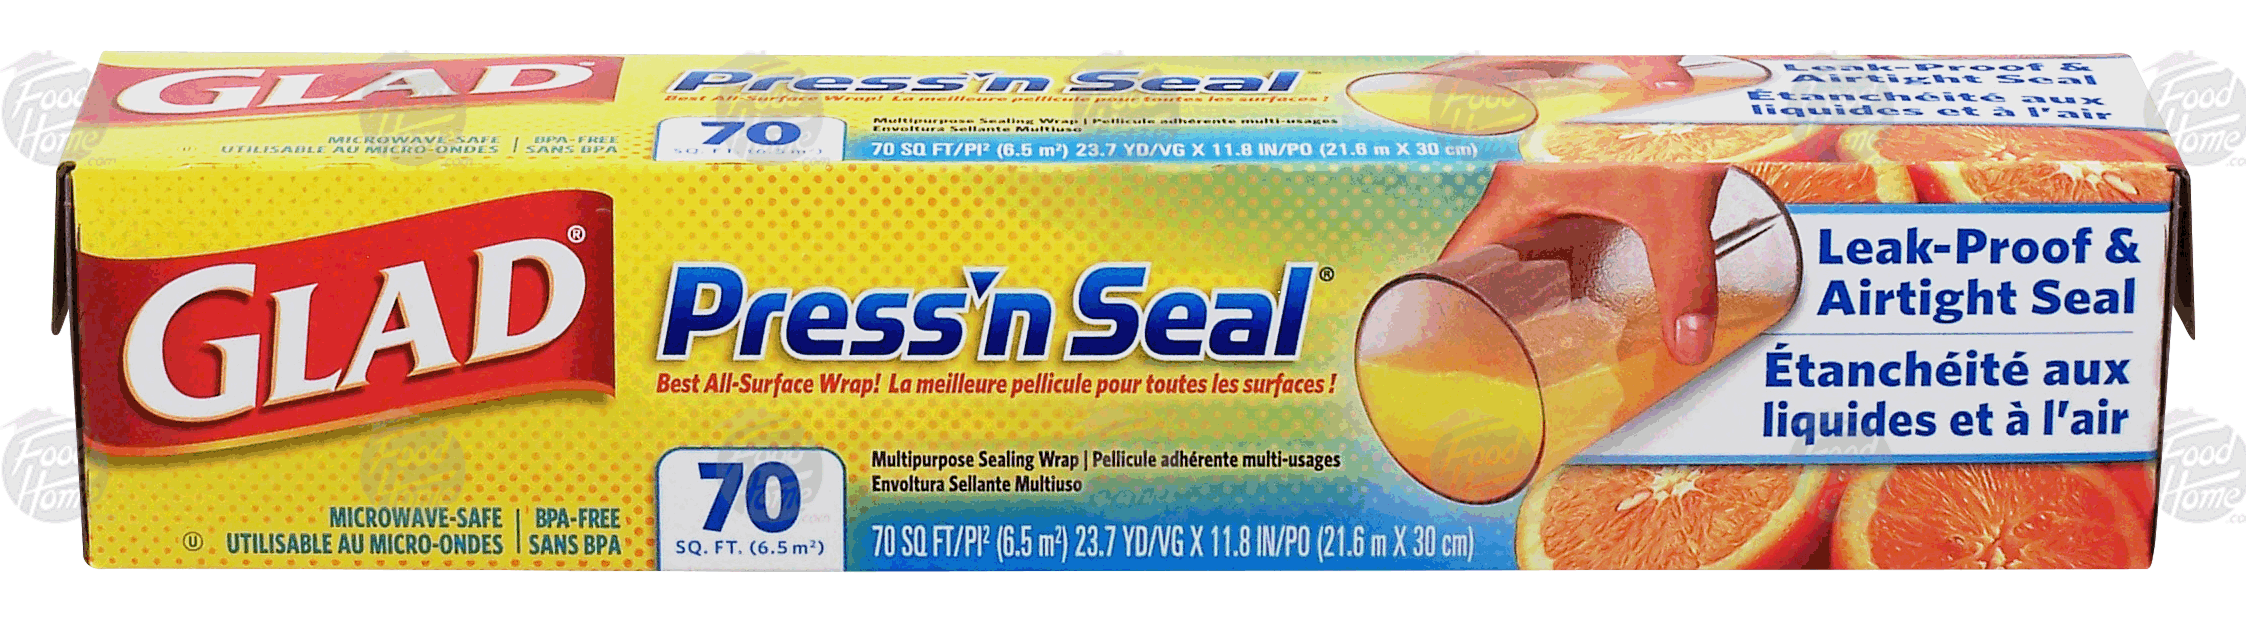 Groceries-Express.com Product Infomation for Glad Press'n Seal